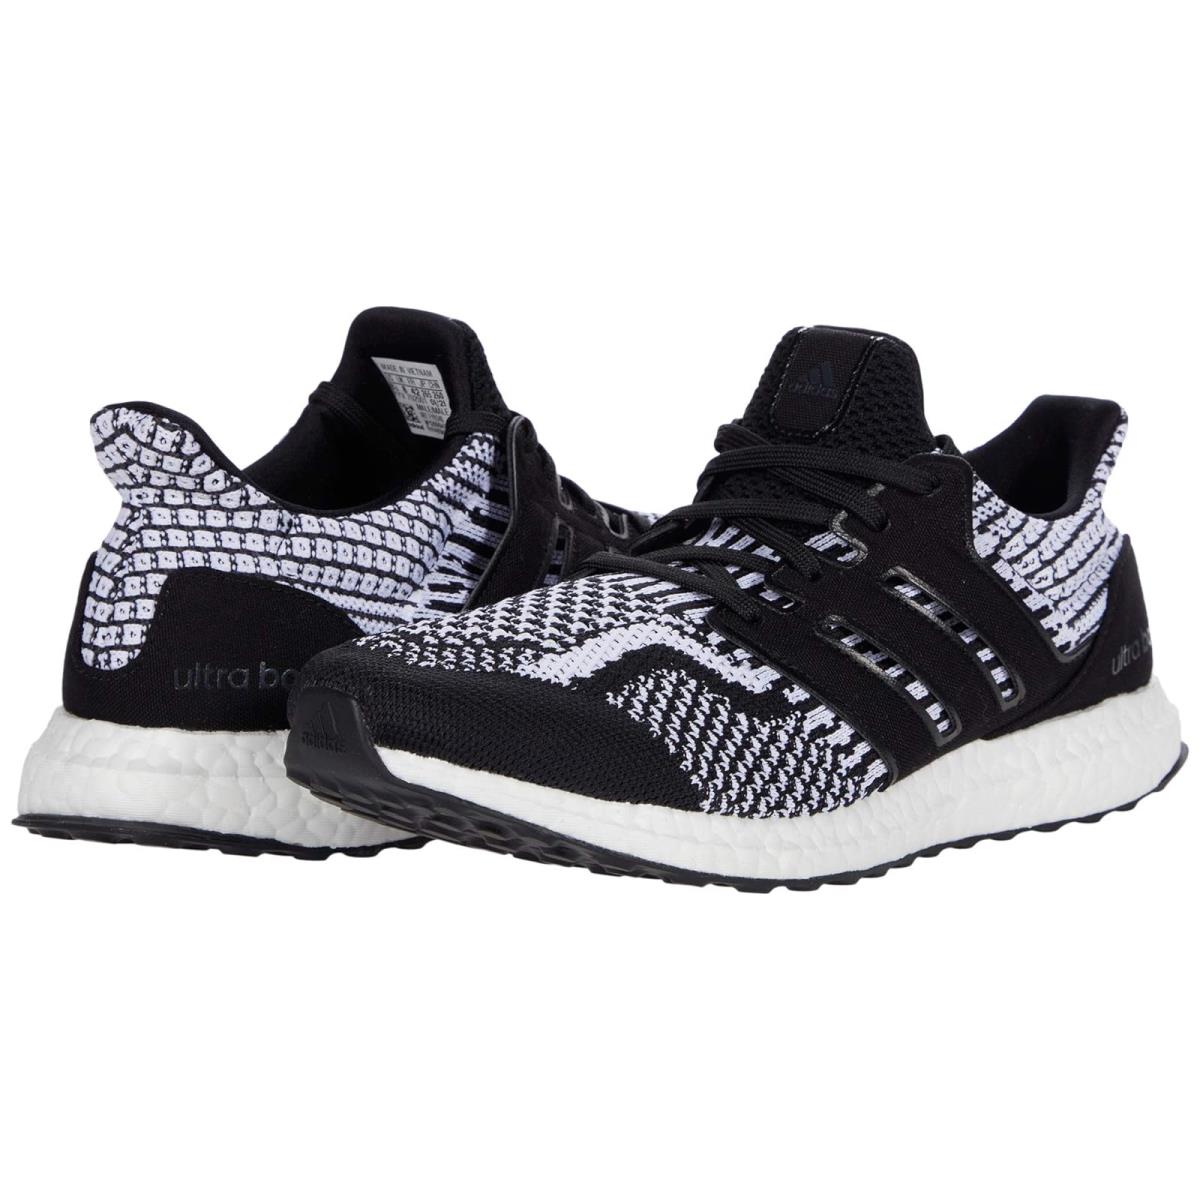 Man`s Sneakers Athletic Shoes Adidas Running Ultraboost Dna Primeblue Black/Black/White